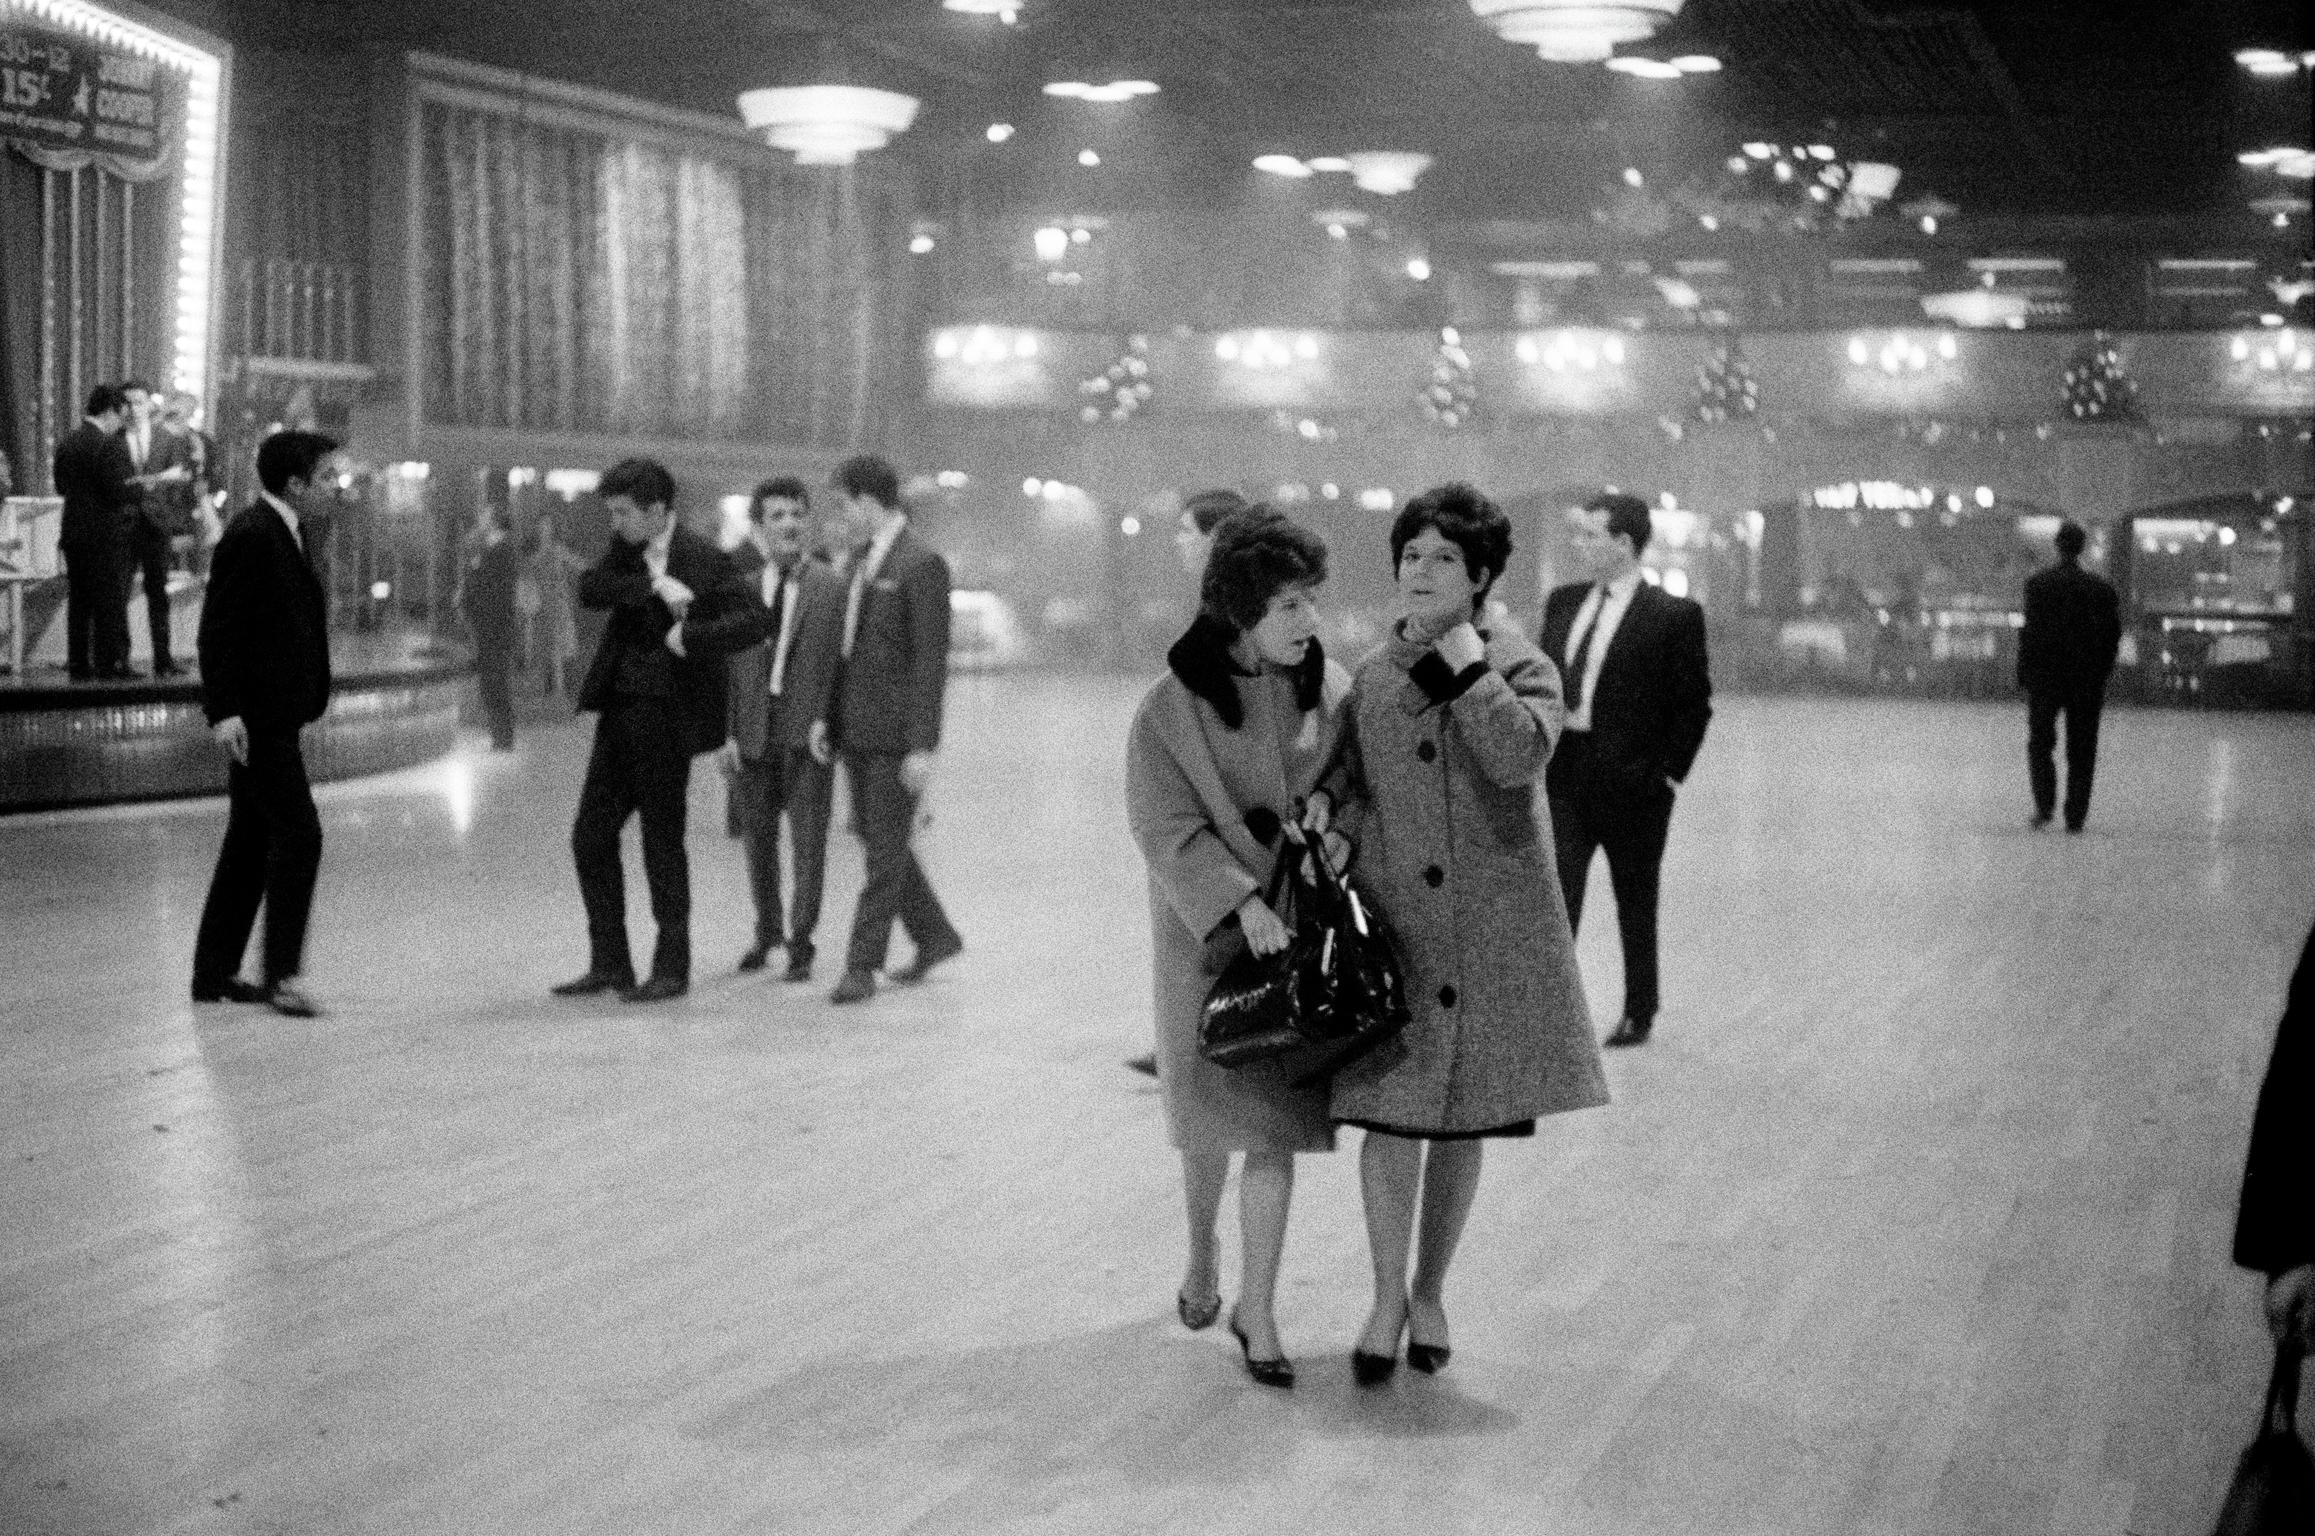 The Hammersmith Palais. The most famous mass dance hall of the 1960s